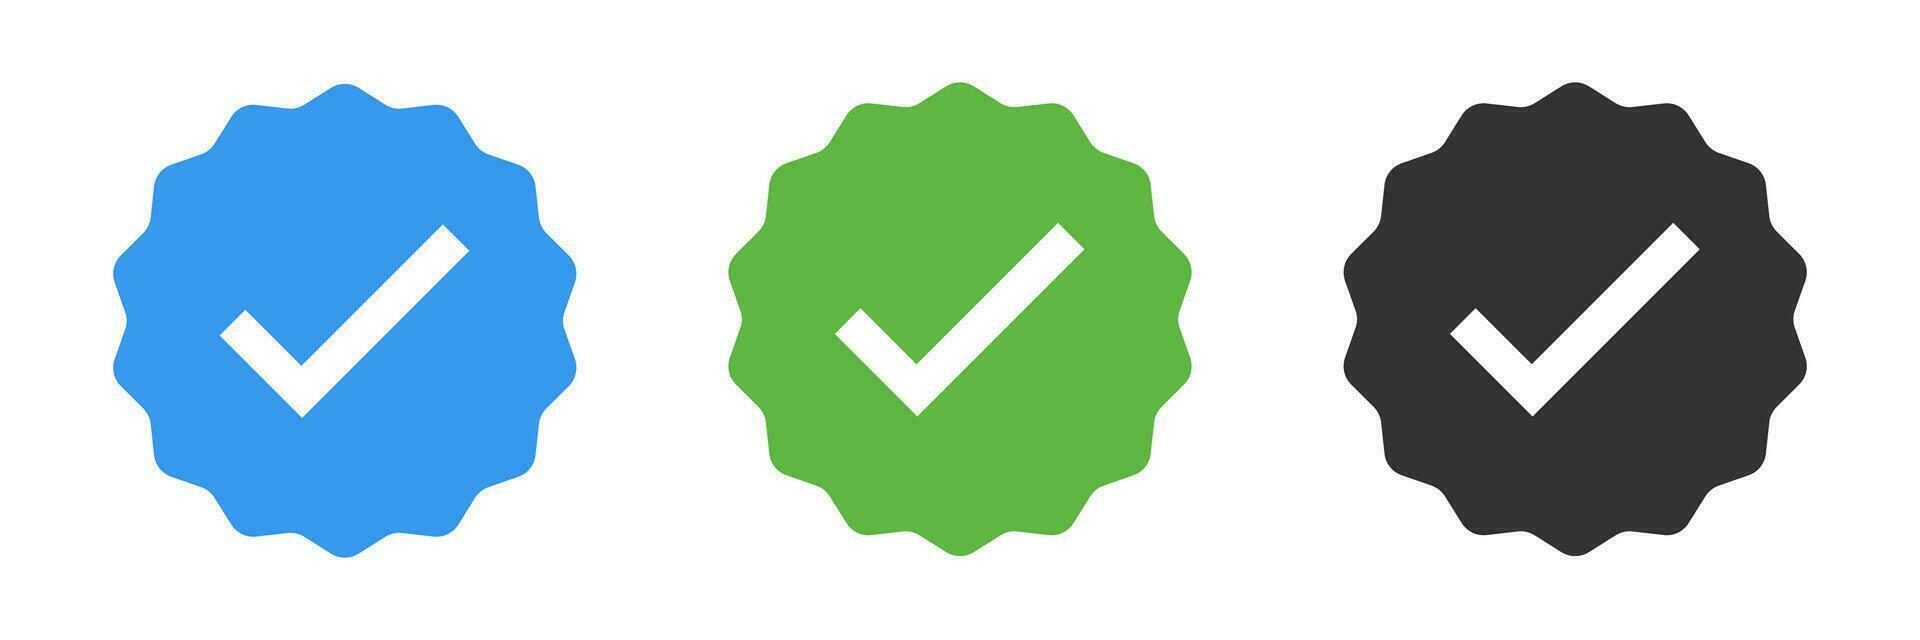 Profile verification check marks icon. Approved symbol. Sign sticker ok vector. vector